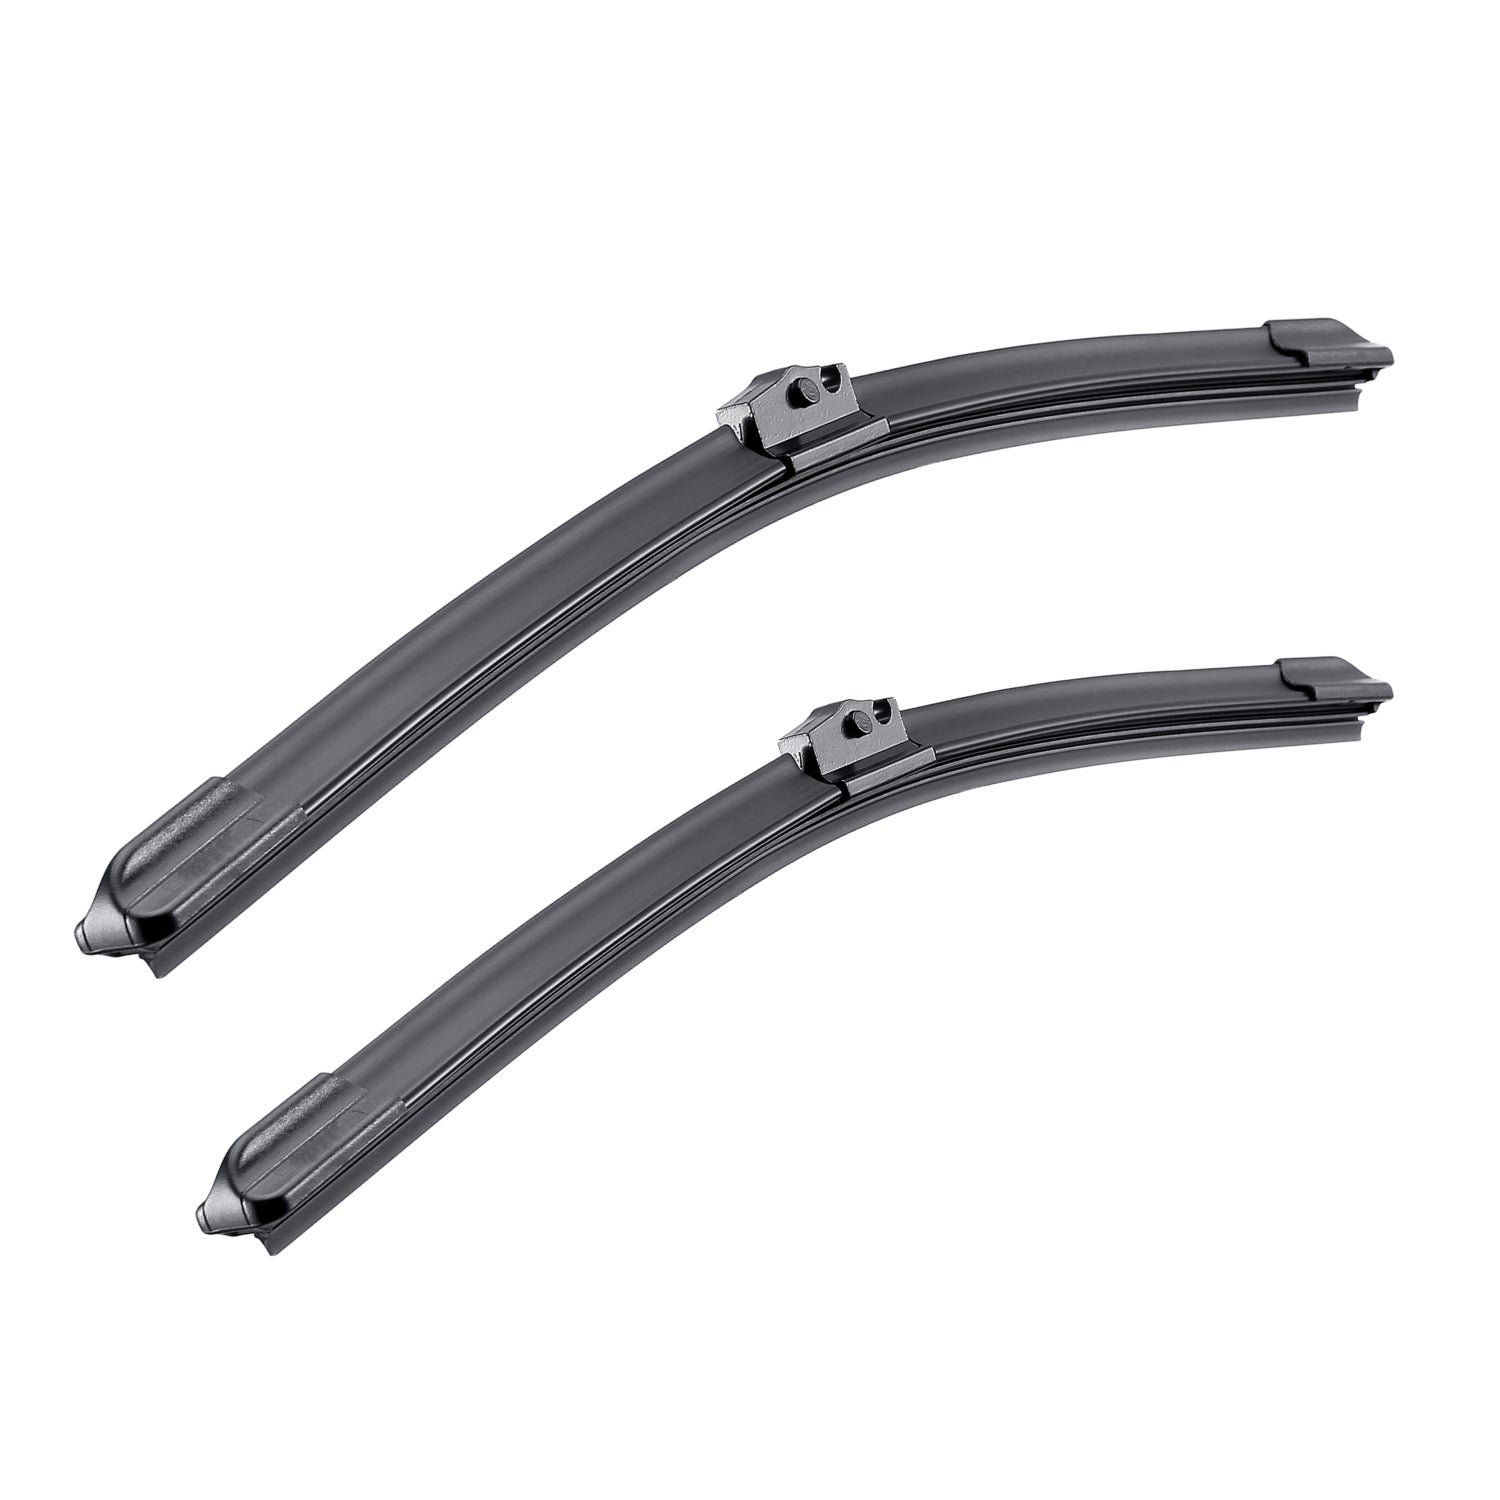 Acatana Beam Wiper Blades for Ford Territory SZ 2011 2012 2013 - 2016 22" + 22" Front Windscreen